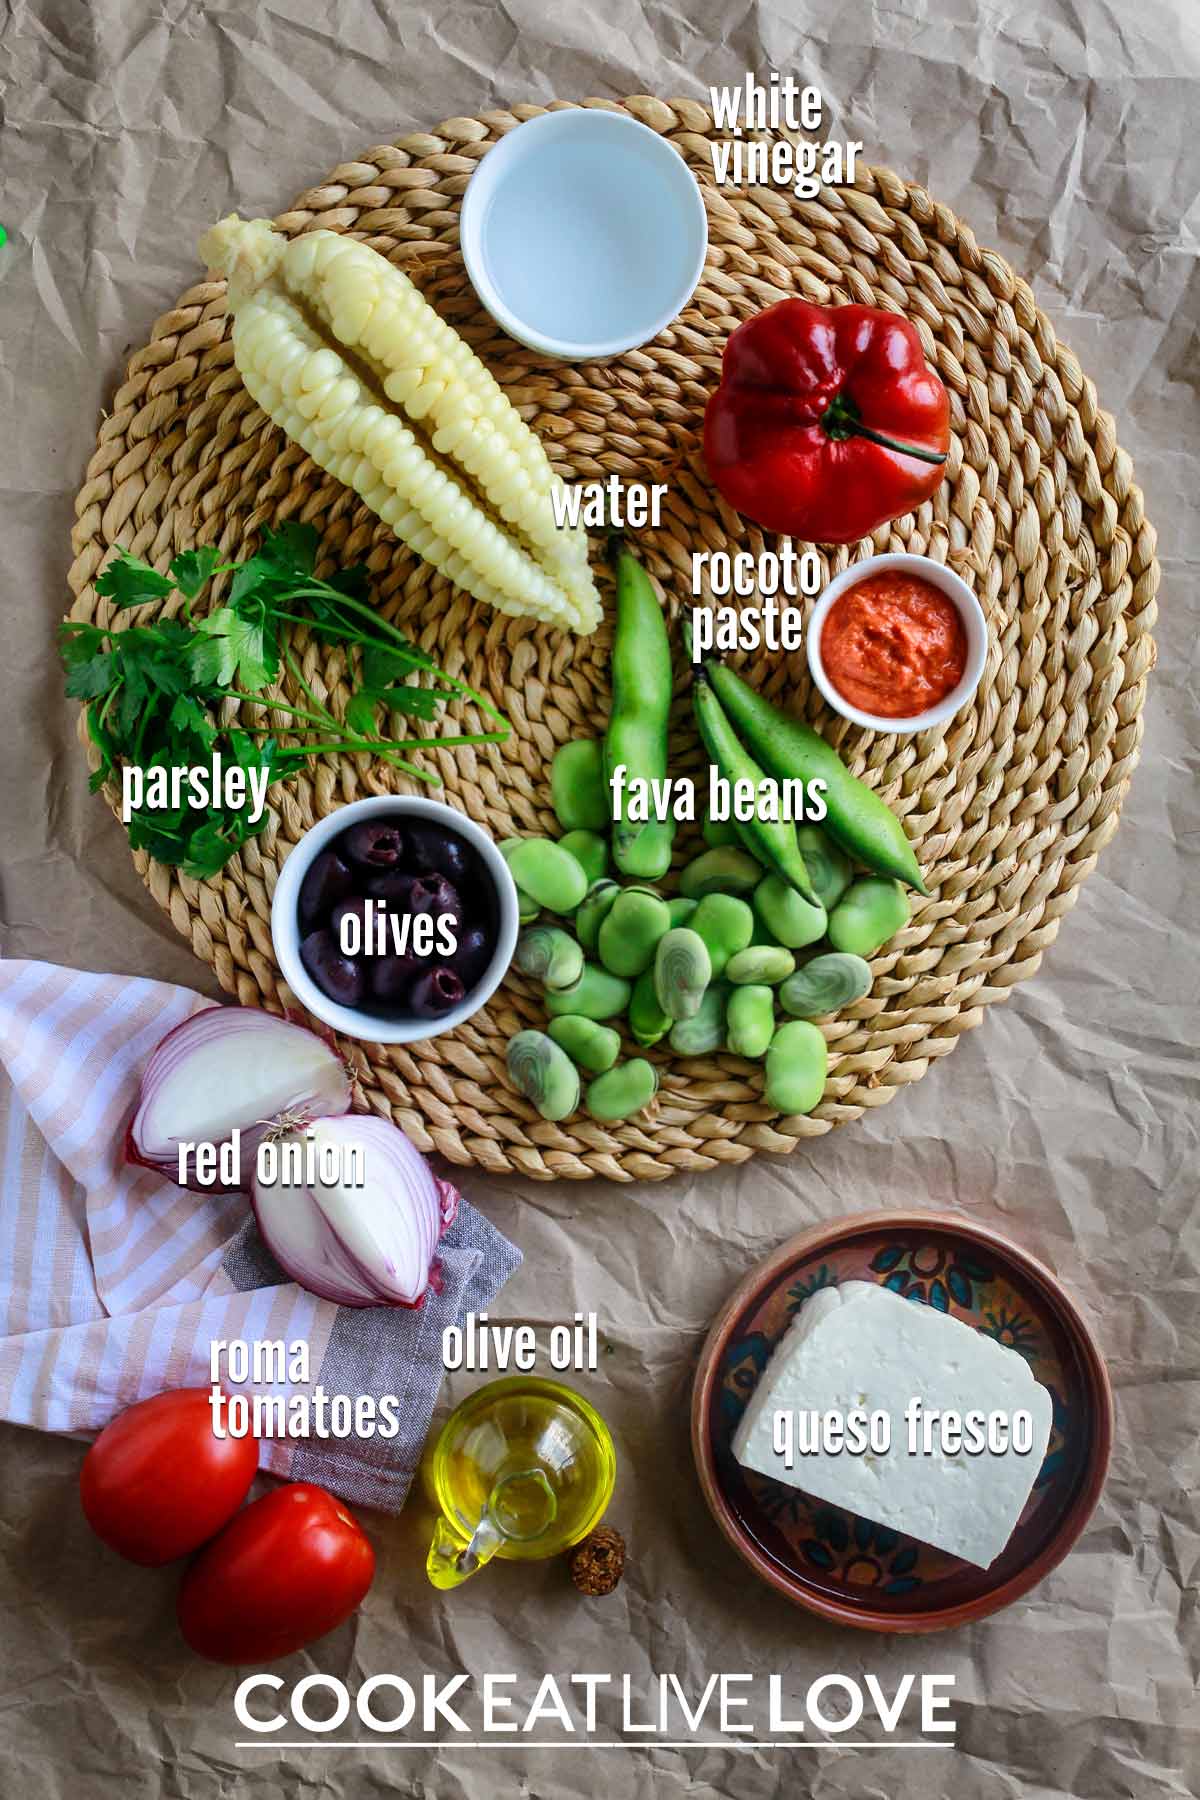 Ingredients to make solterito on the table.